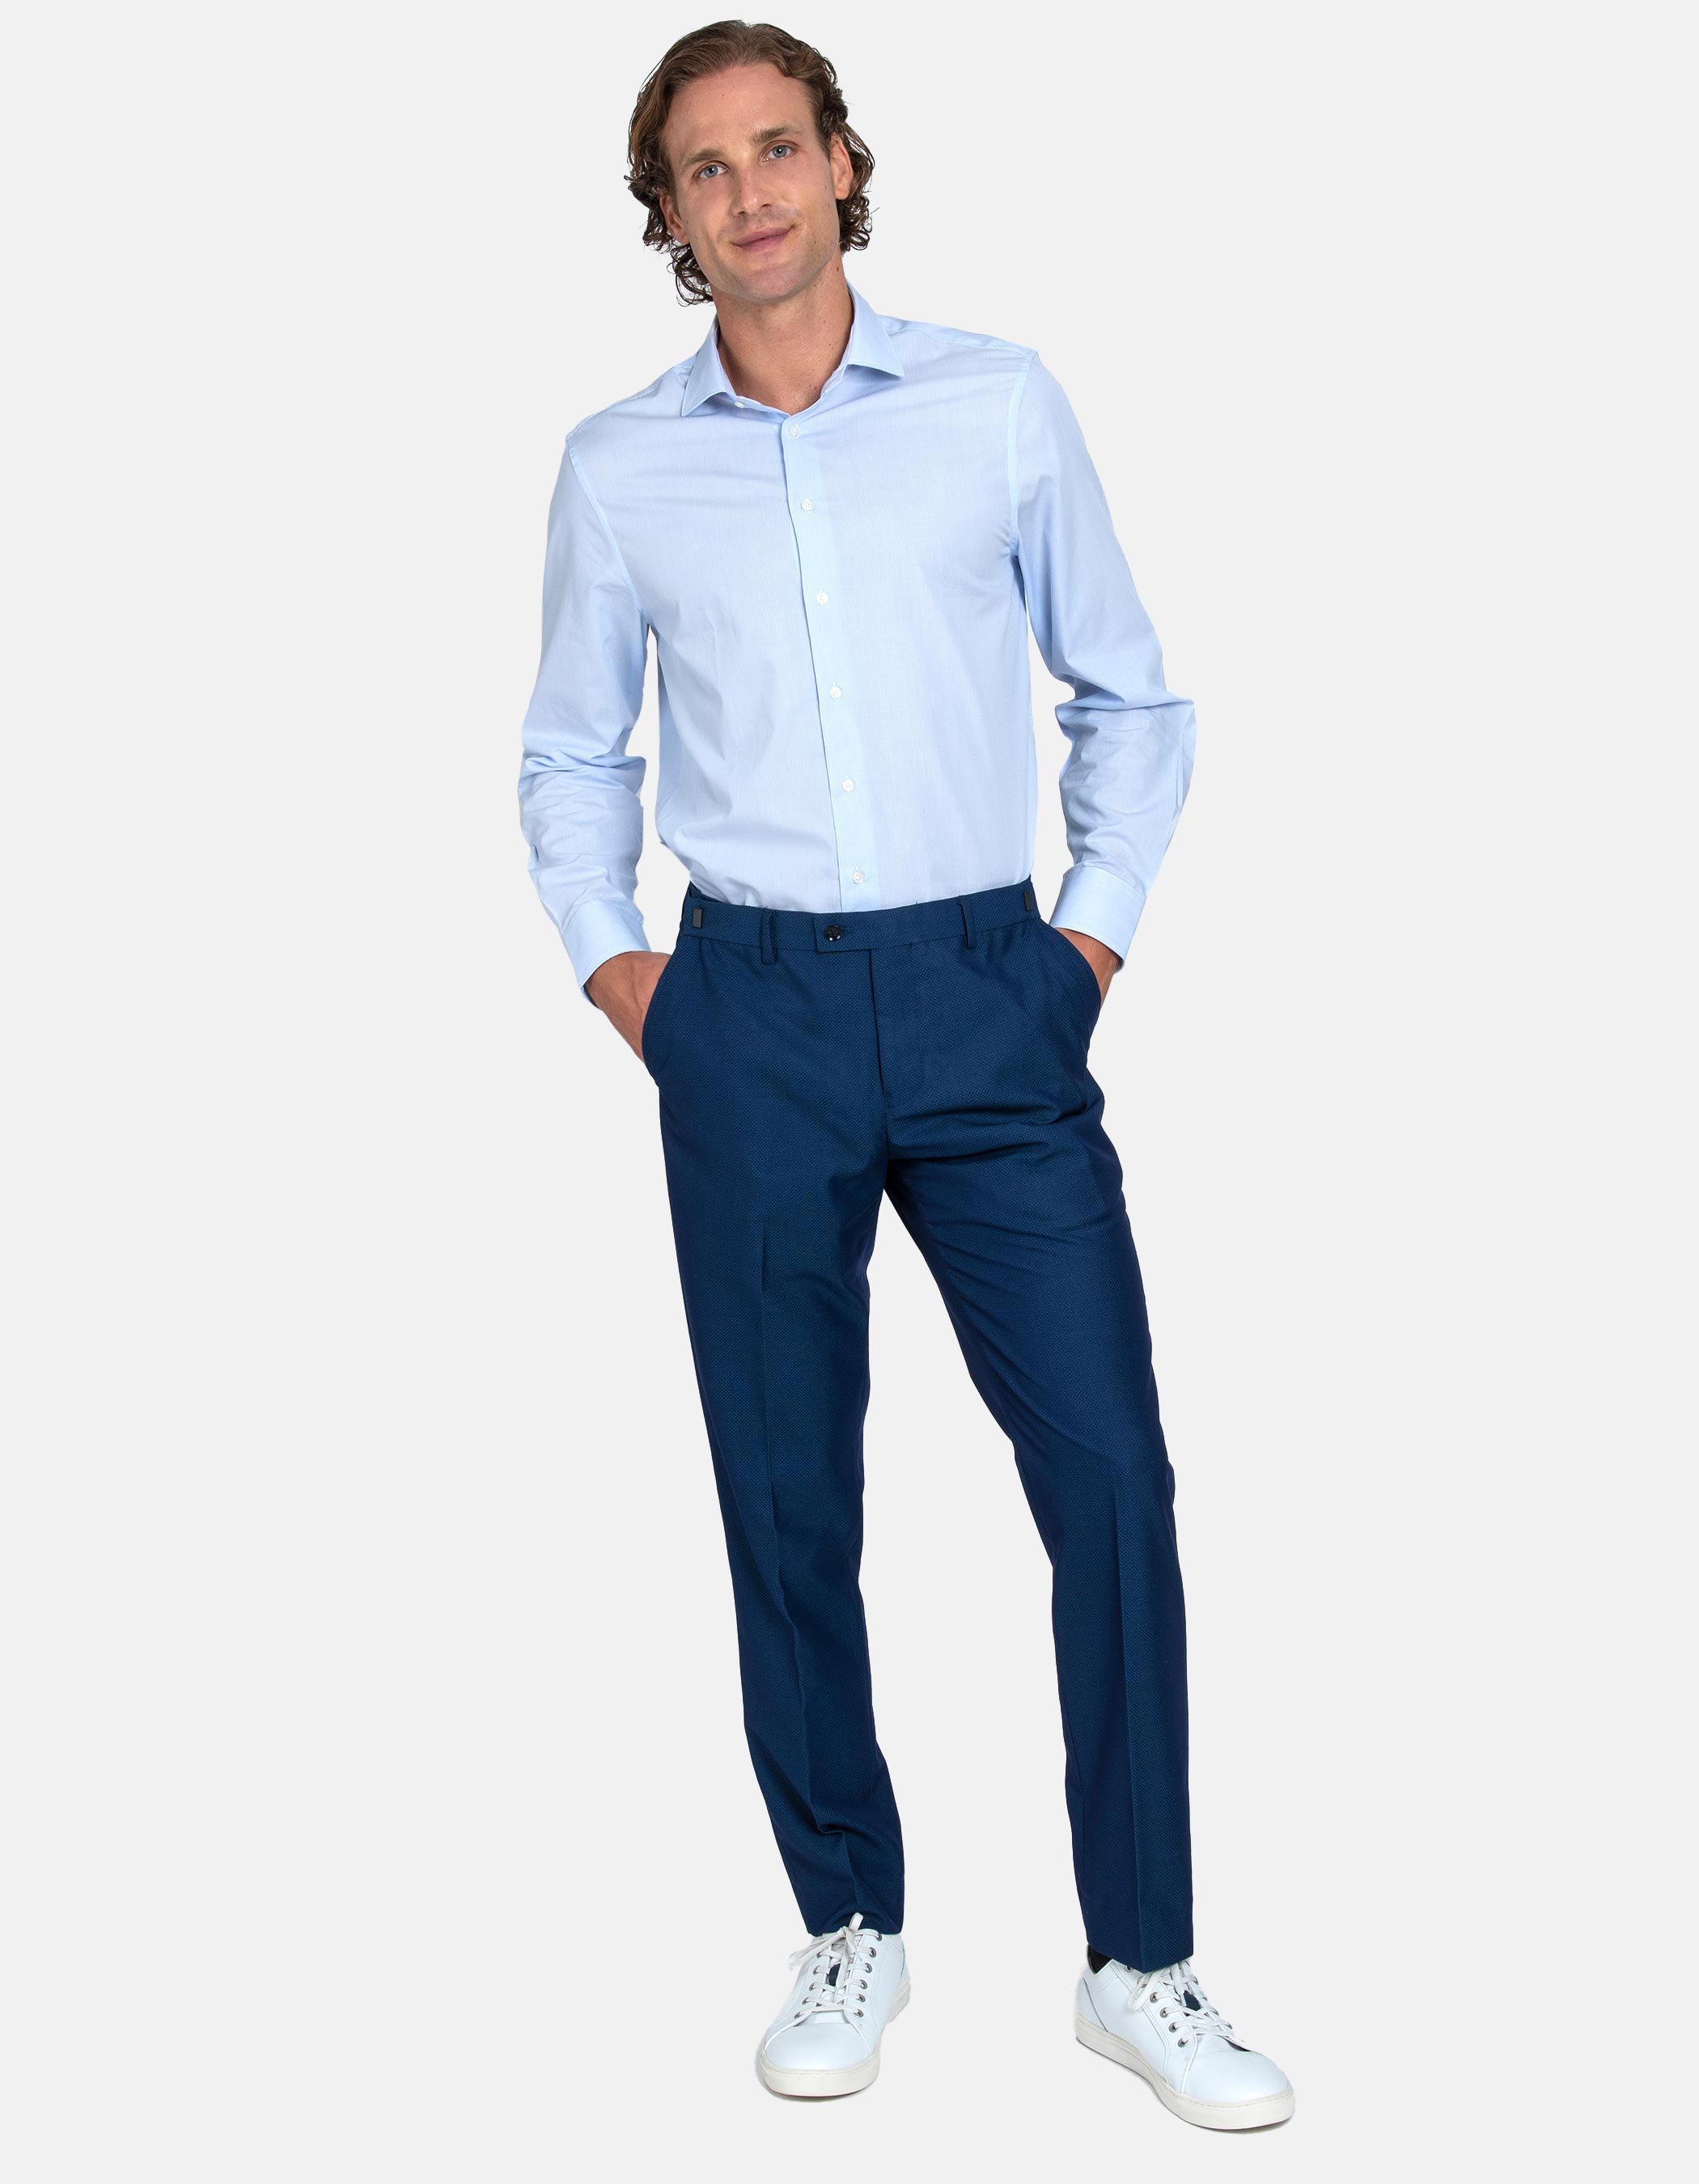 Chemise blanche à rayures bleues 5